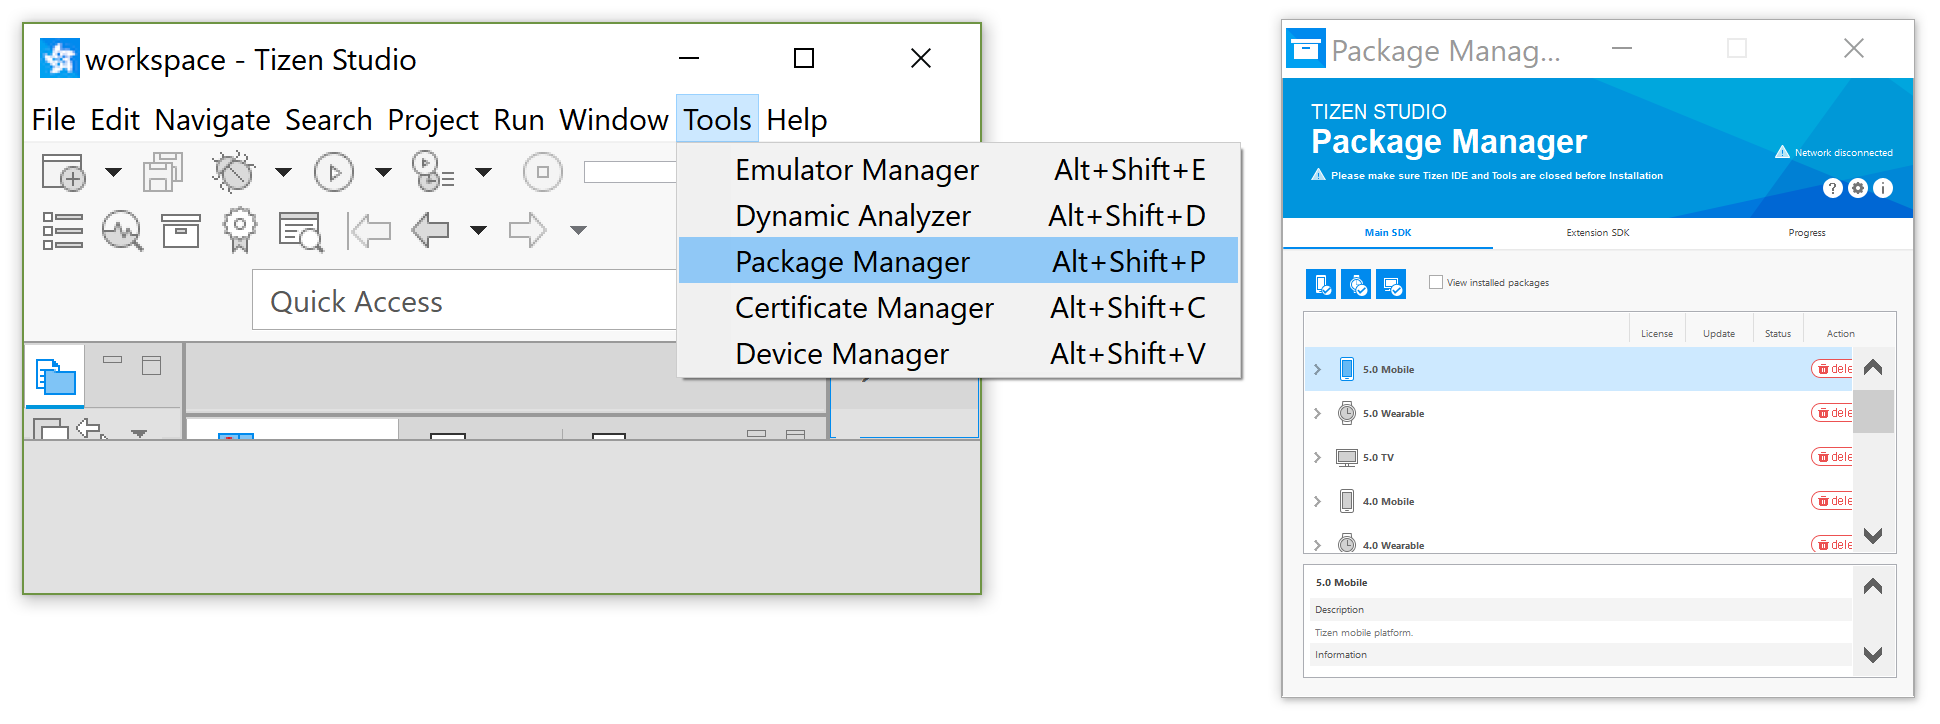 Launch the Tizen Studio Package Manager